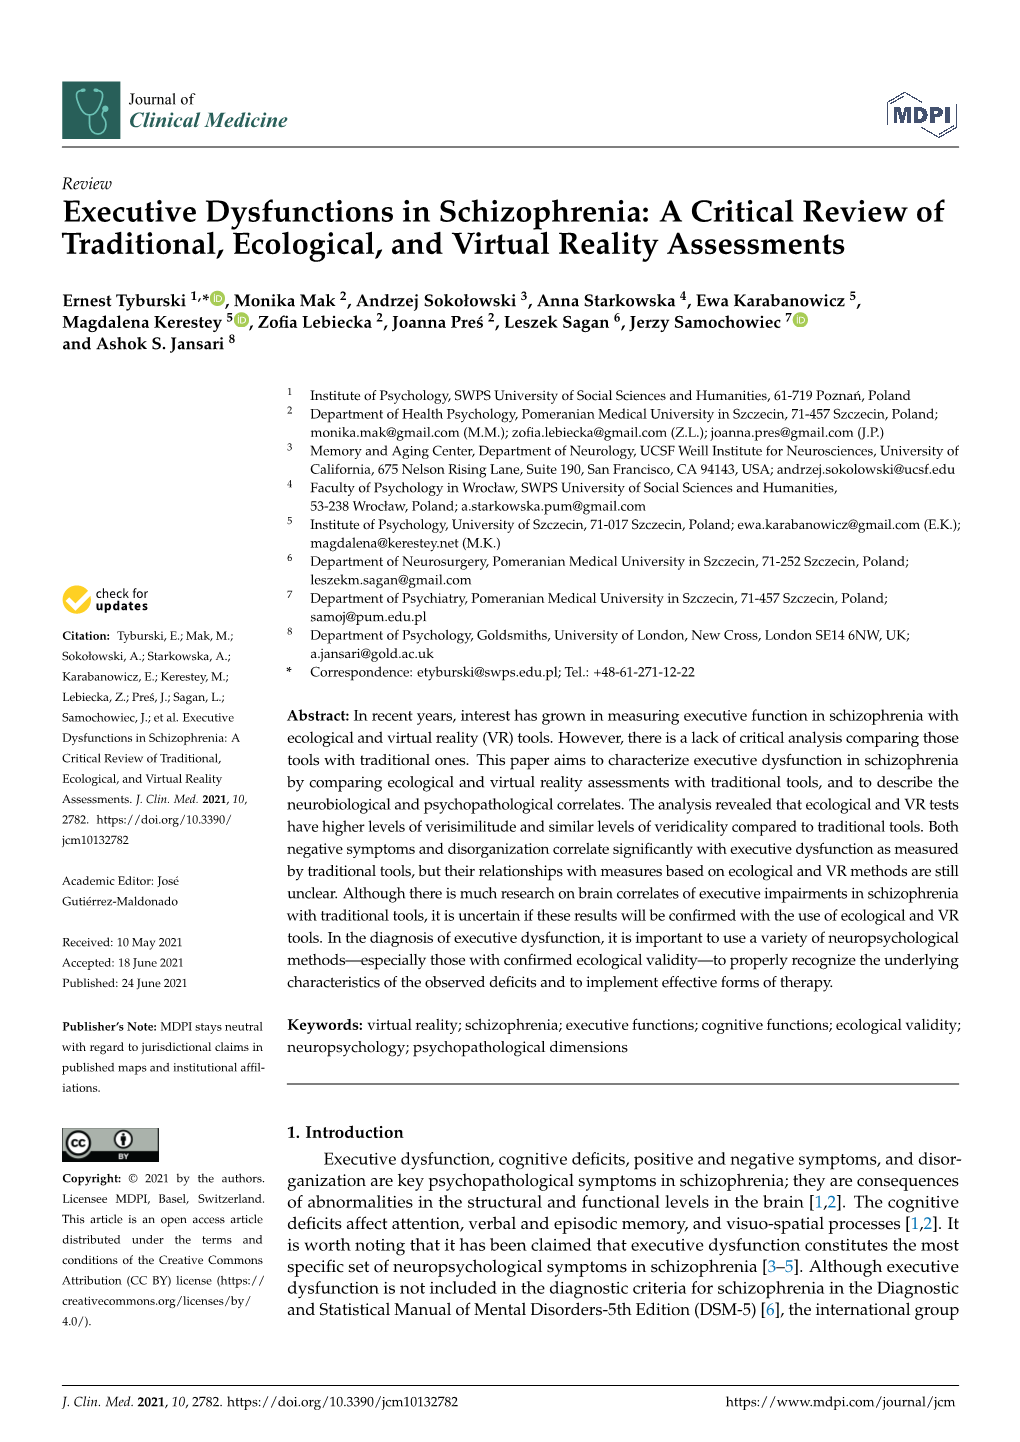 Executive Dysfunctions in Schizophrenia: a Critical Review of Traditional, Ecological, and Virtual Reality Assessments